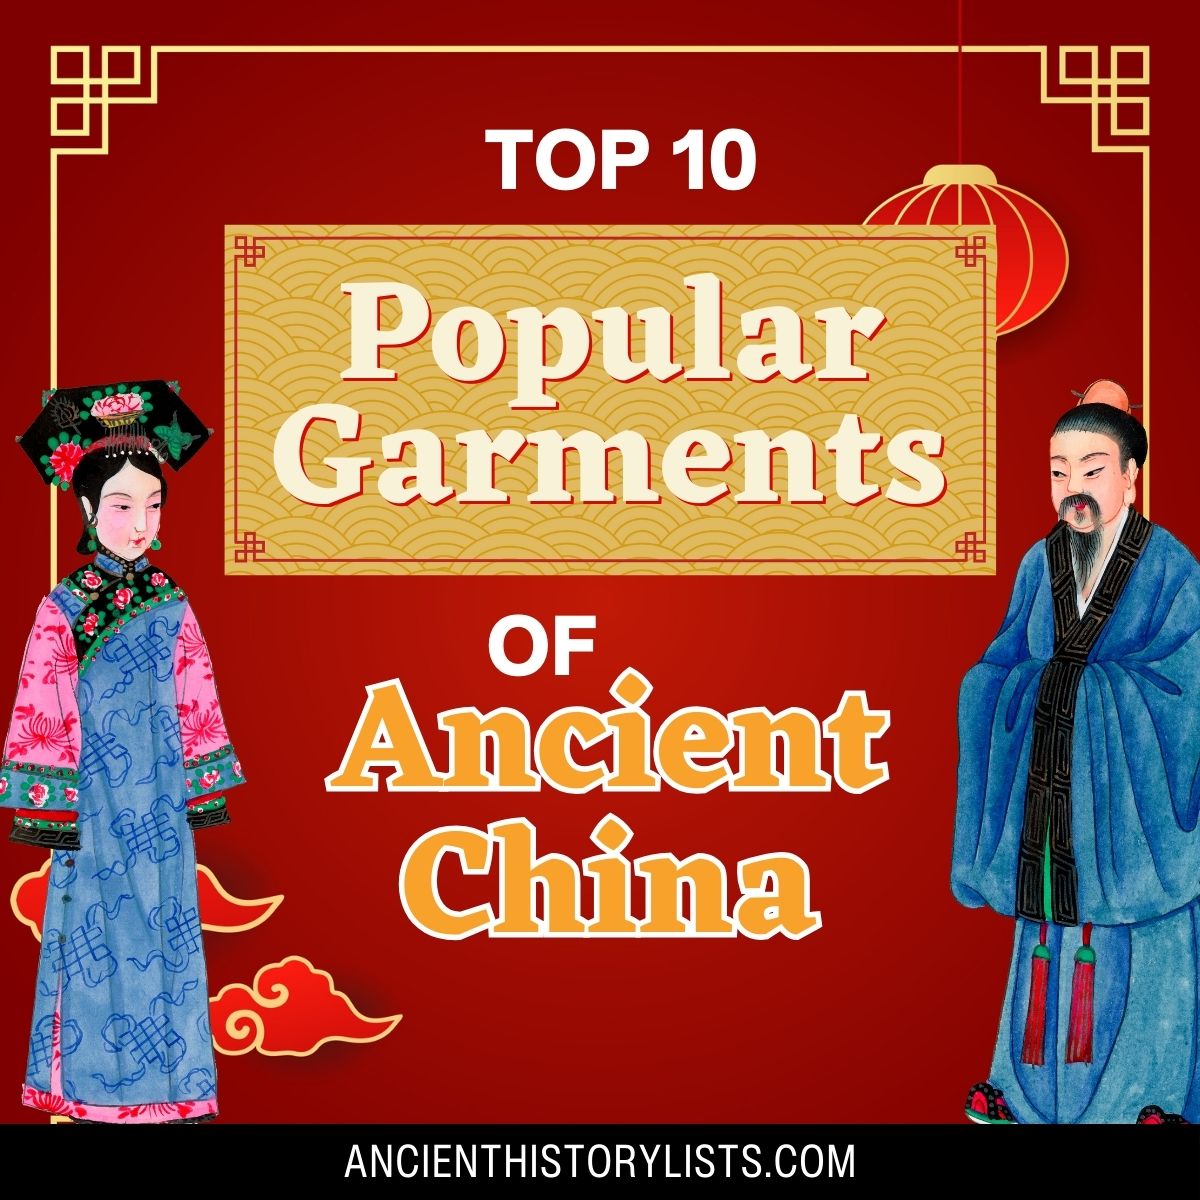 Garments That Were Popular in Ancient China